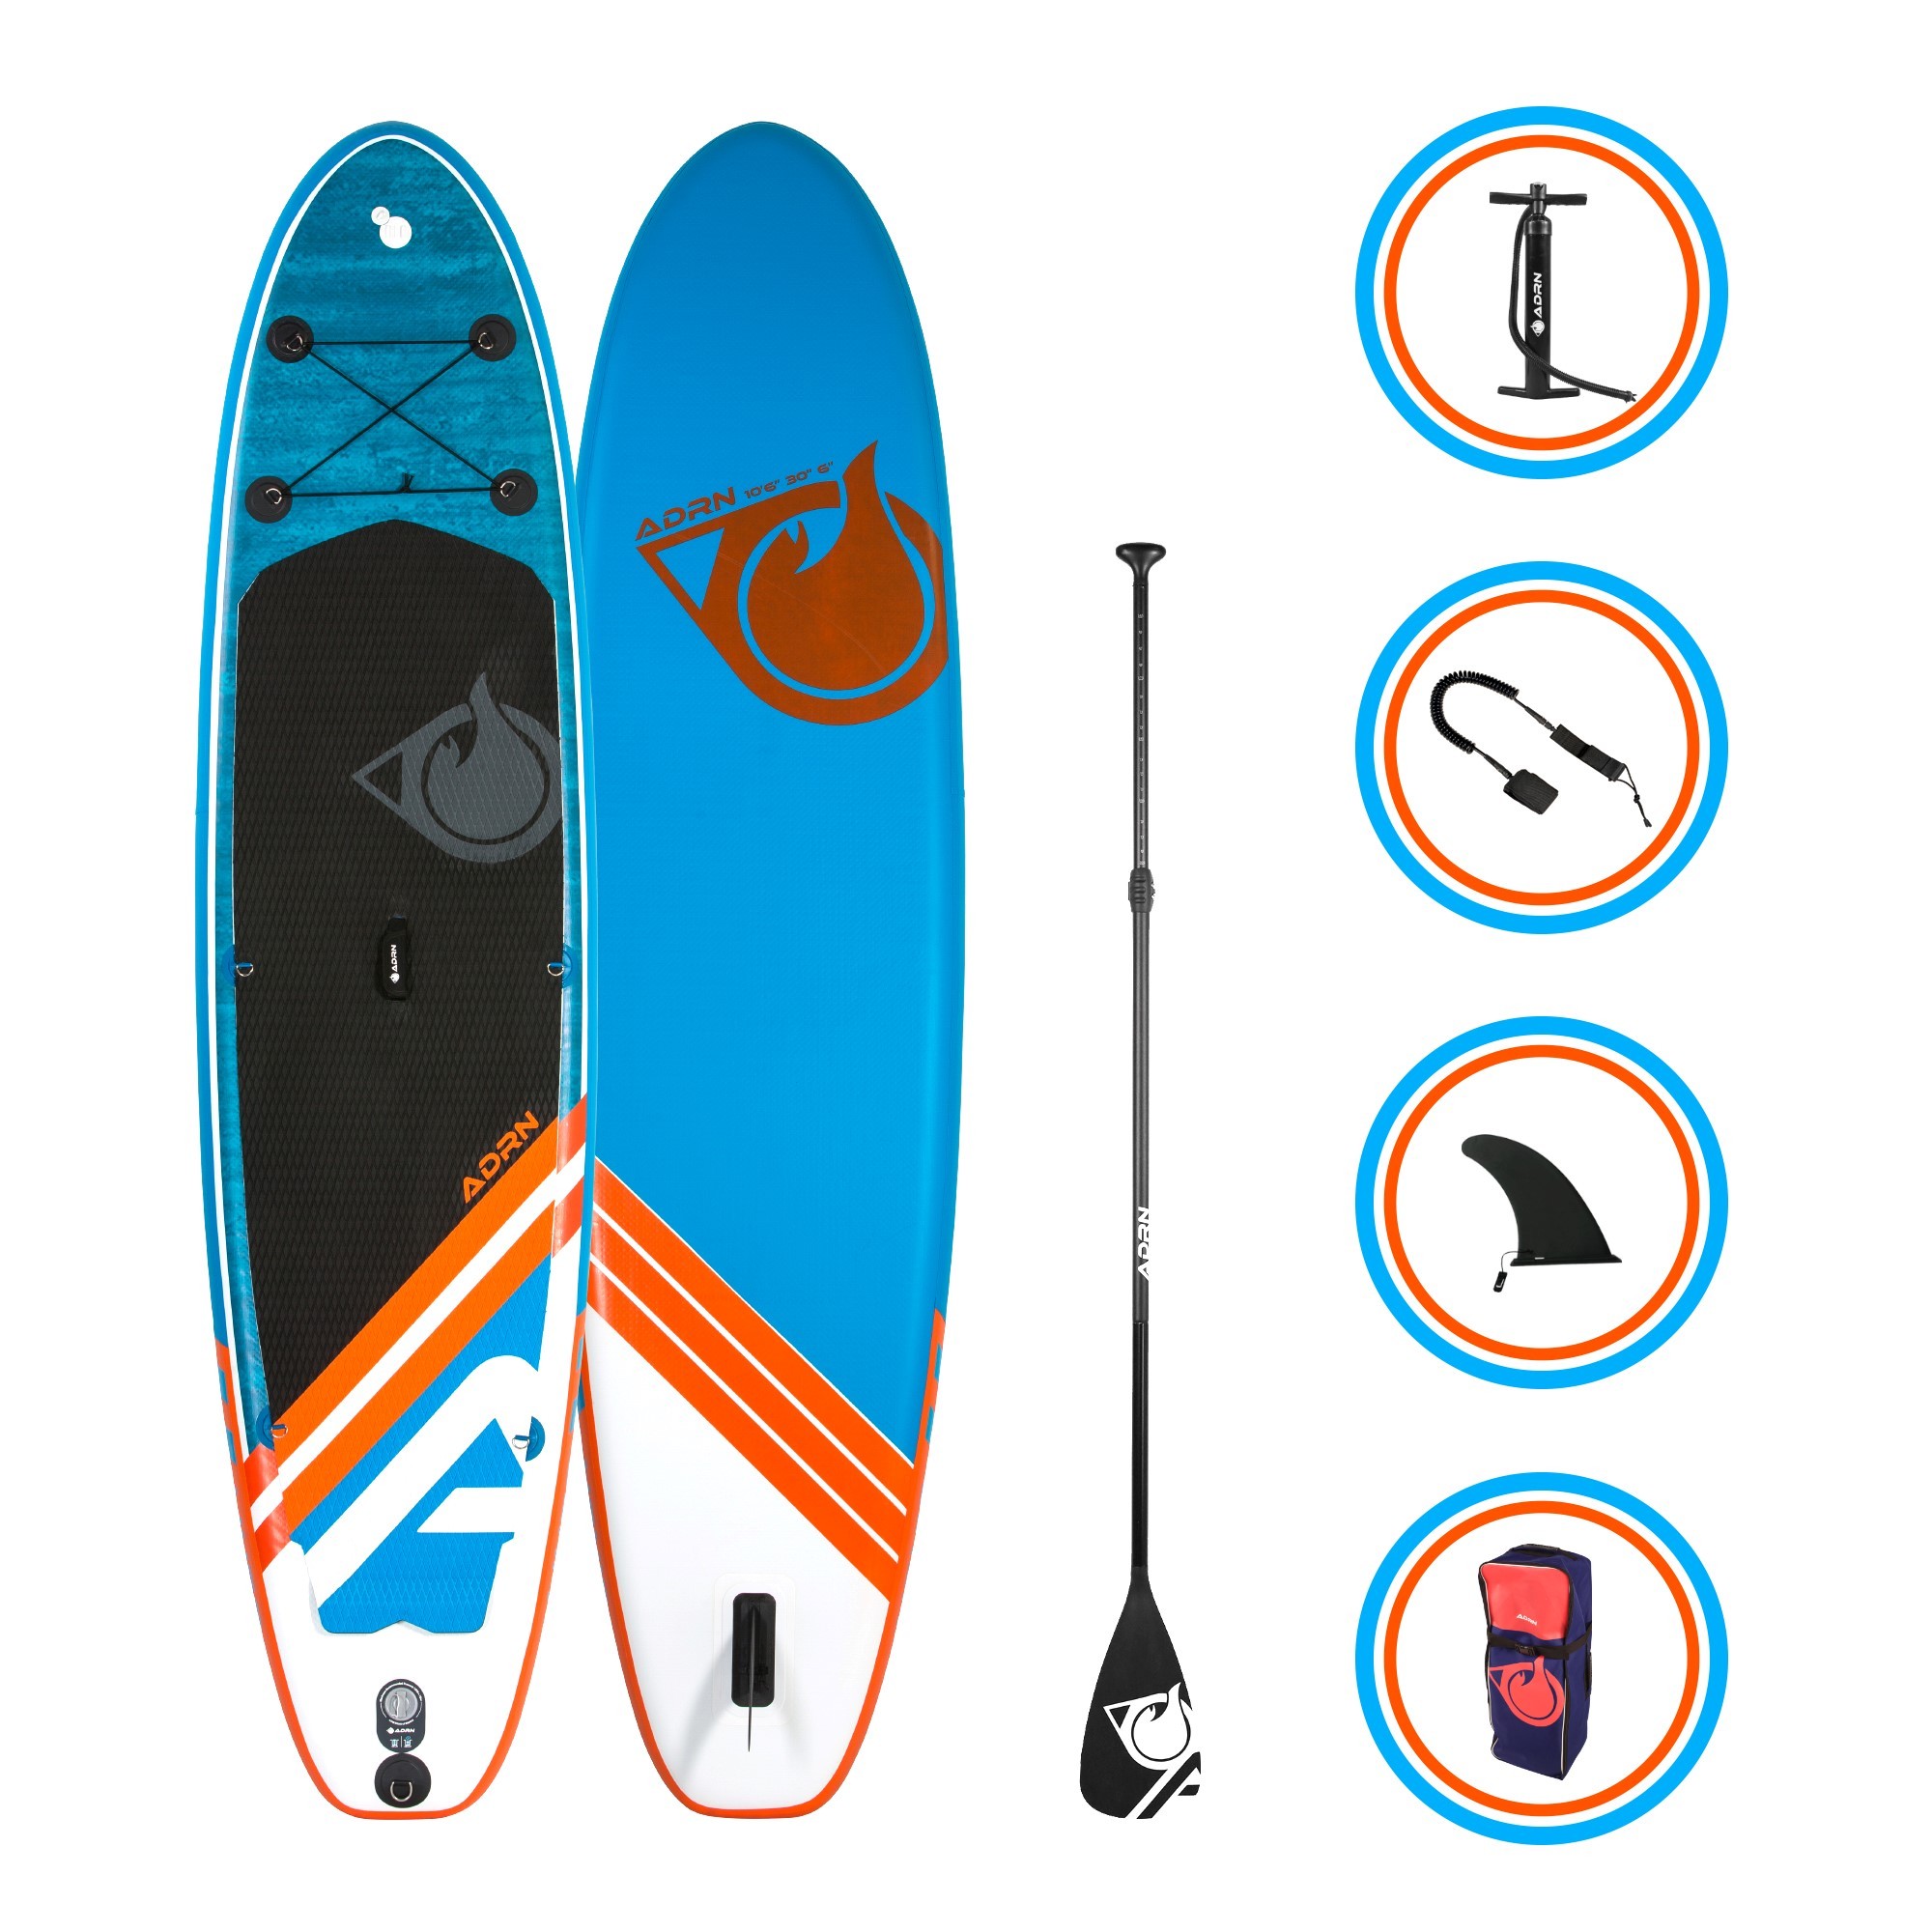 Paddle Hinchable Liner 10'6 + Accesorios 320 X 76 X 15 Cm - Paddle Surf  MKP